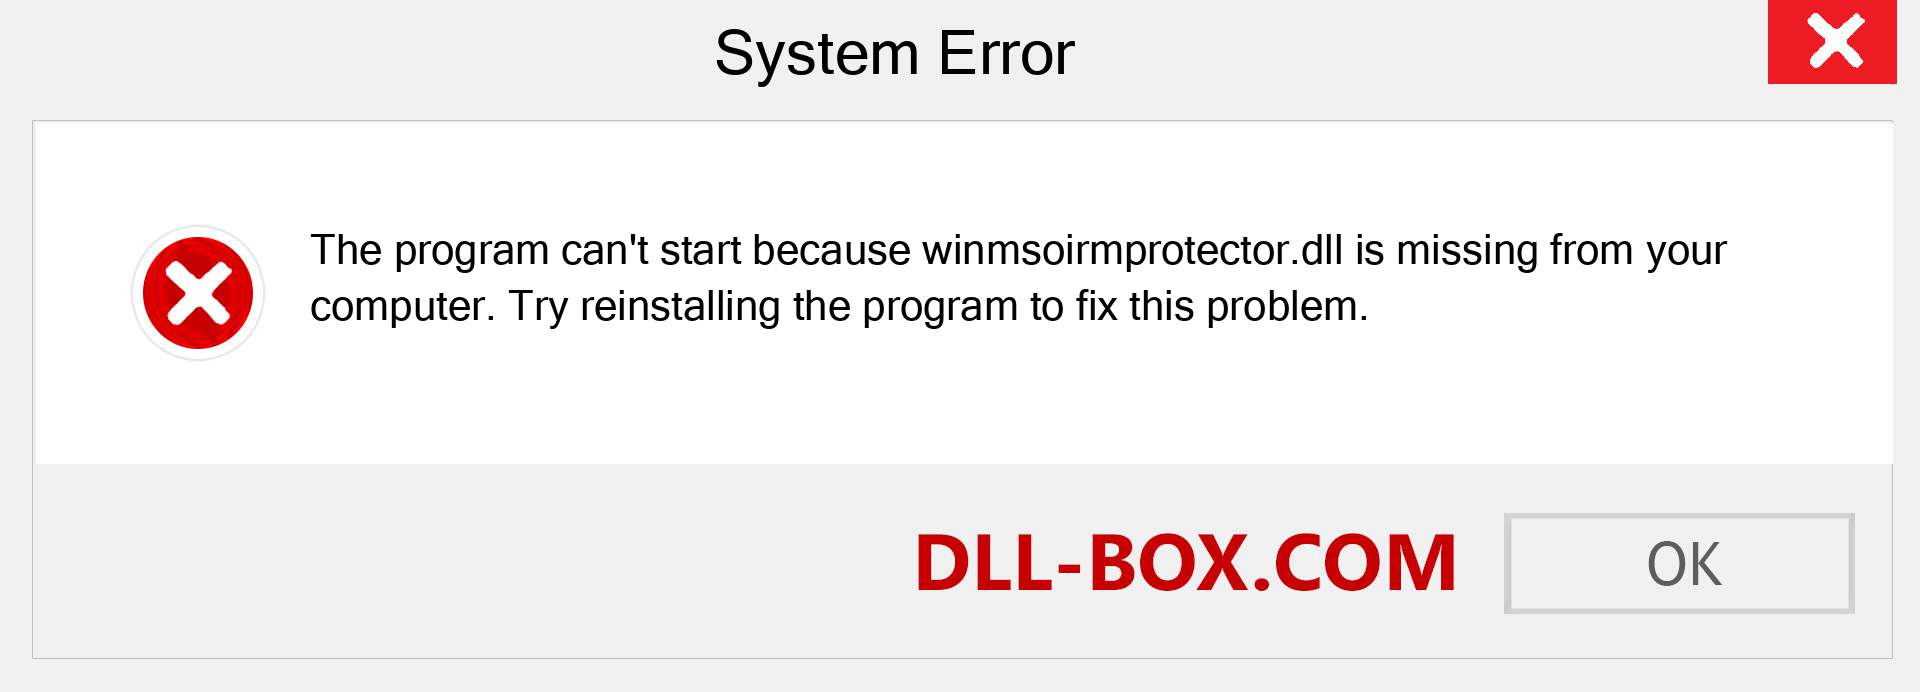  winmsoirmprotector.dll file is missing?. Download for Windows 7, 8, 10 - Fix  winmsoirmprotector dll Missing Error on Windows, photos, images